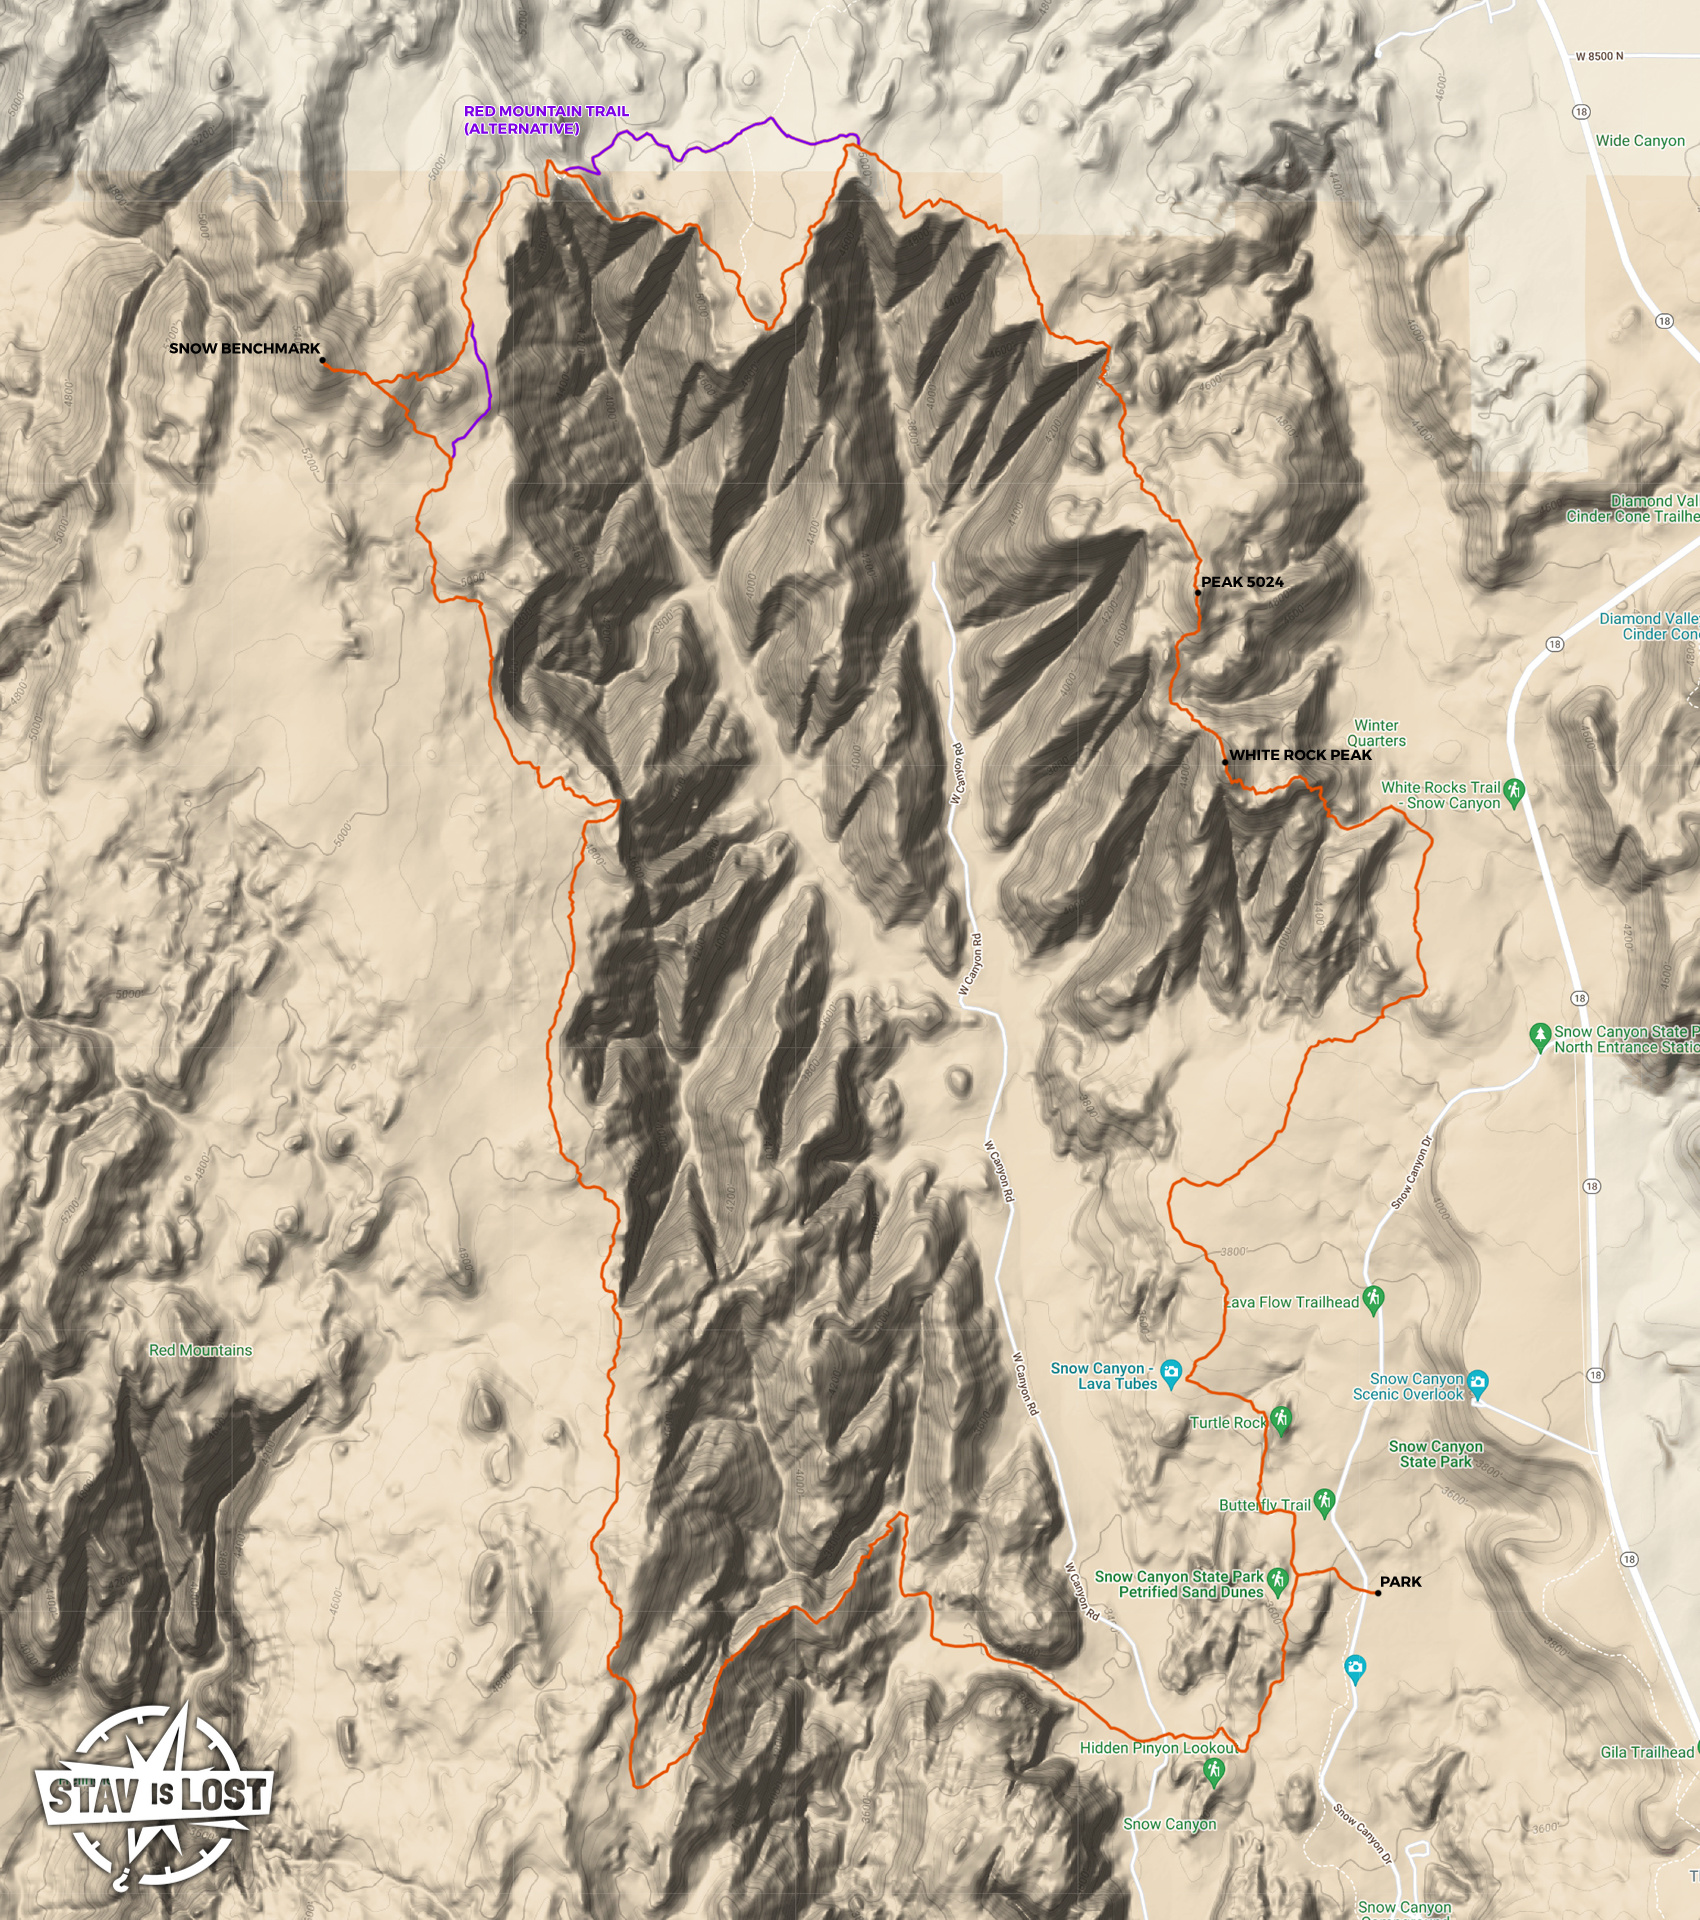 map for White Rock Peak, Snow Benchmark, Snow Canyon Rim Loop by stav is lost